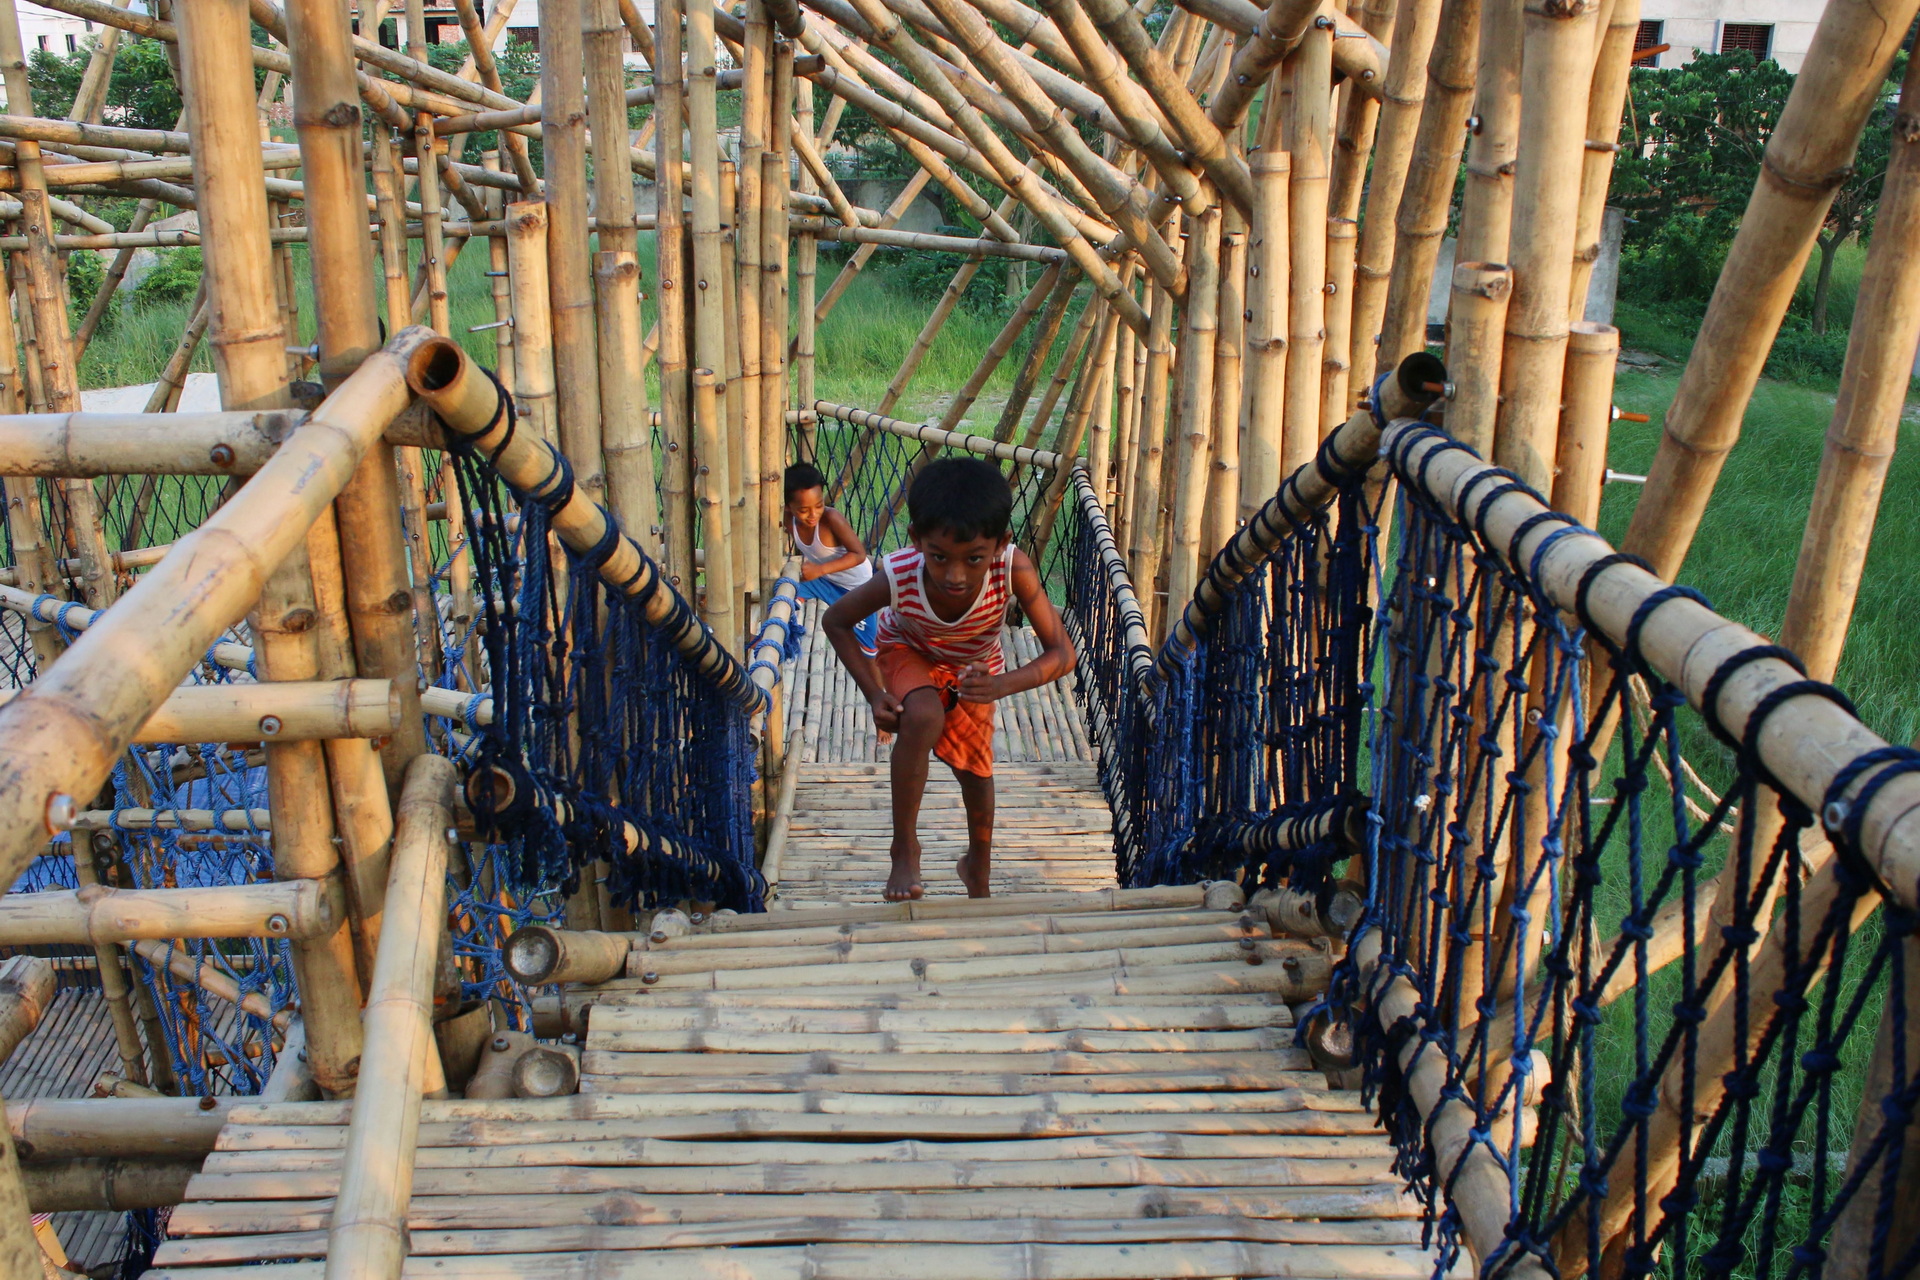 <p>Children exploring the bamboo playspace</p>